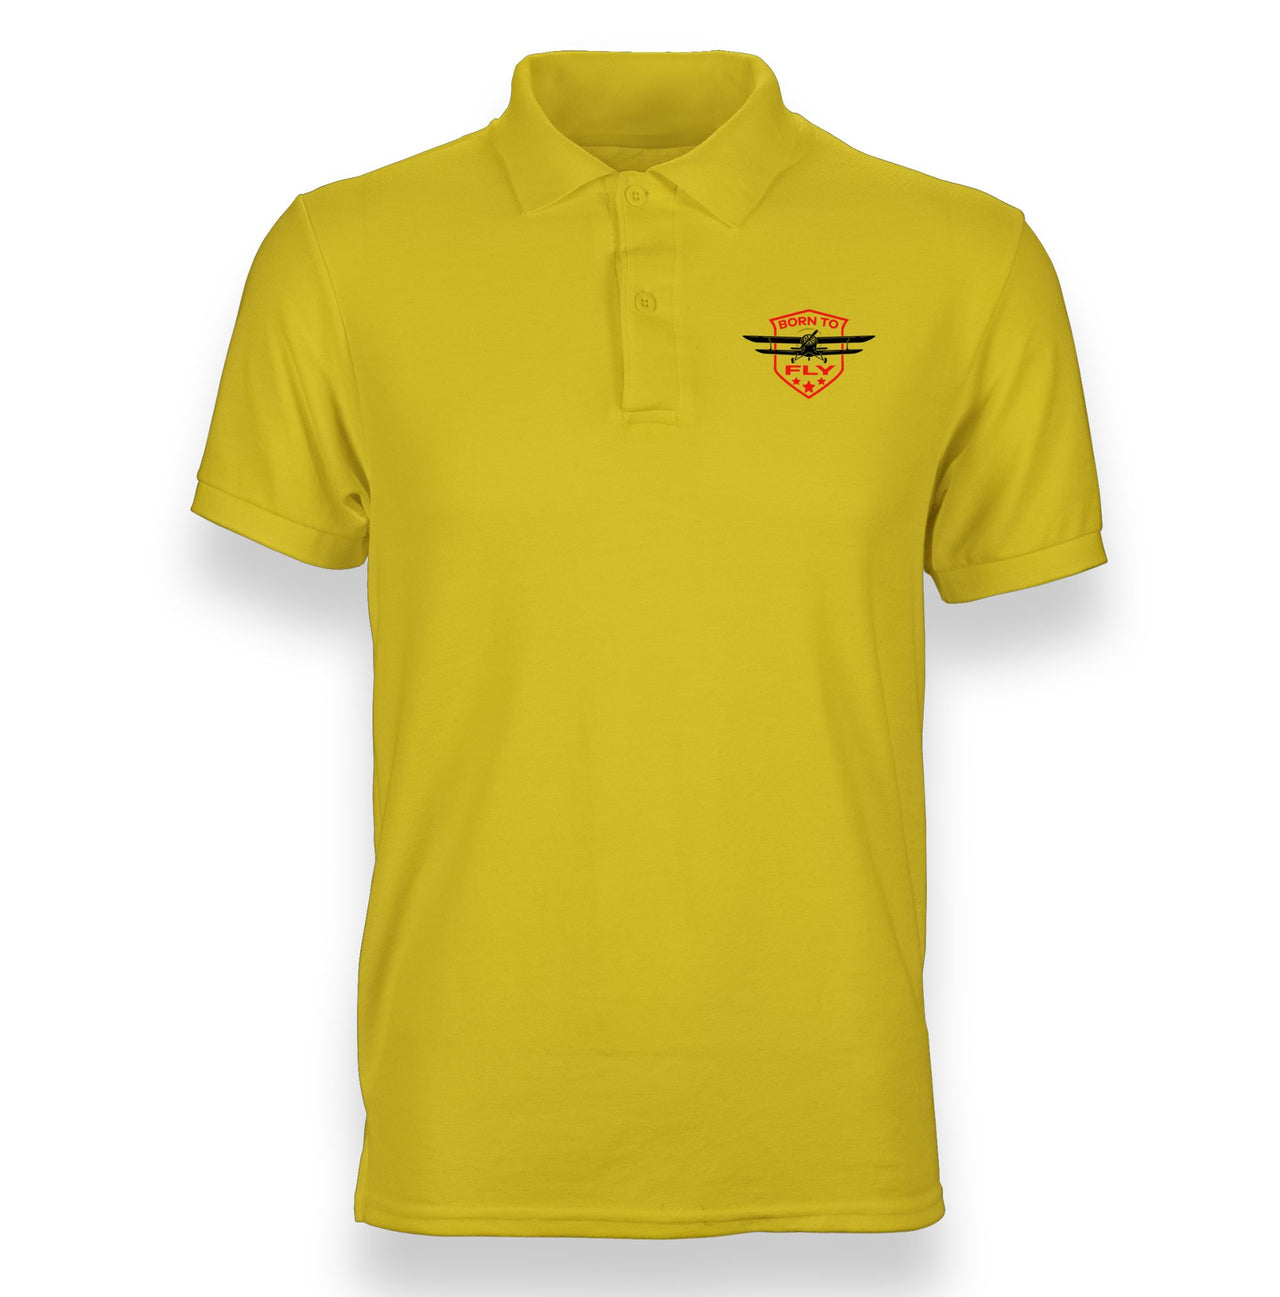 Born To Fly Designed Designed "WOMEN" Polo T-Shirts